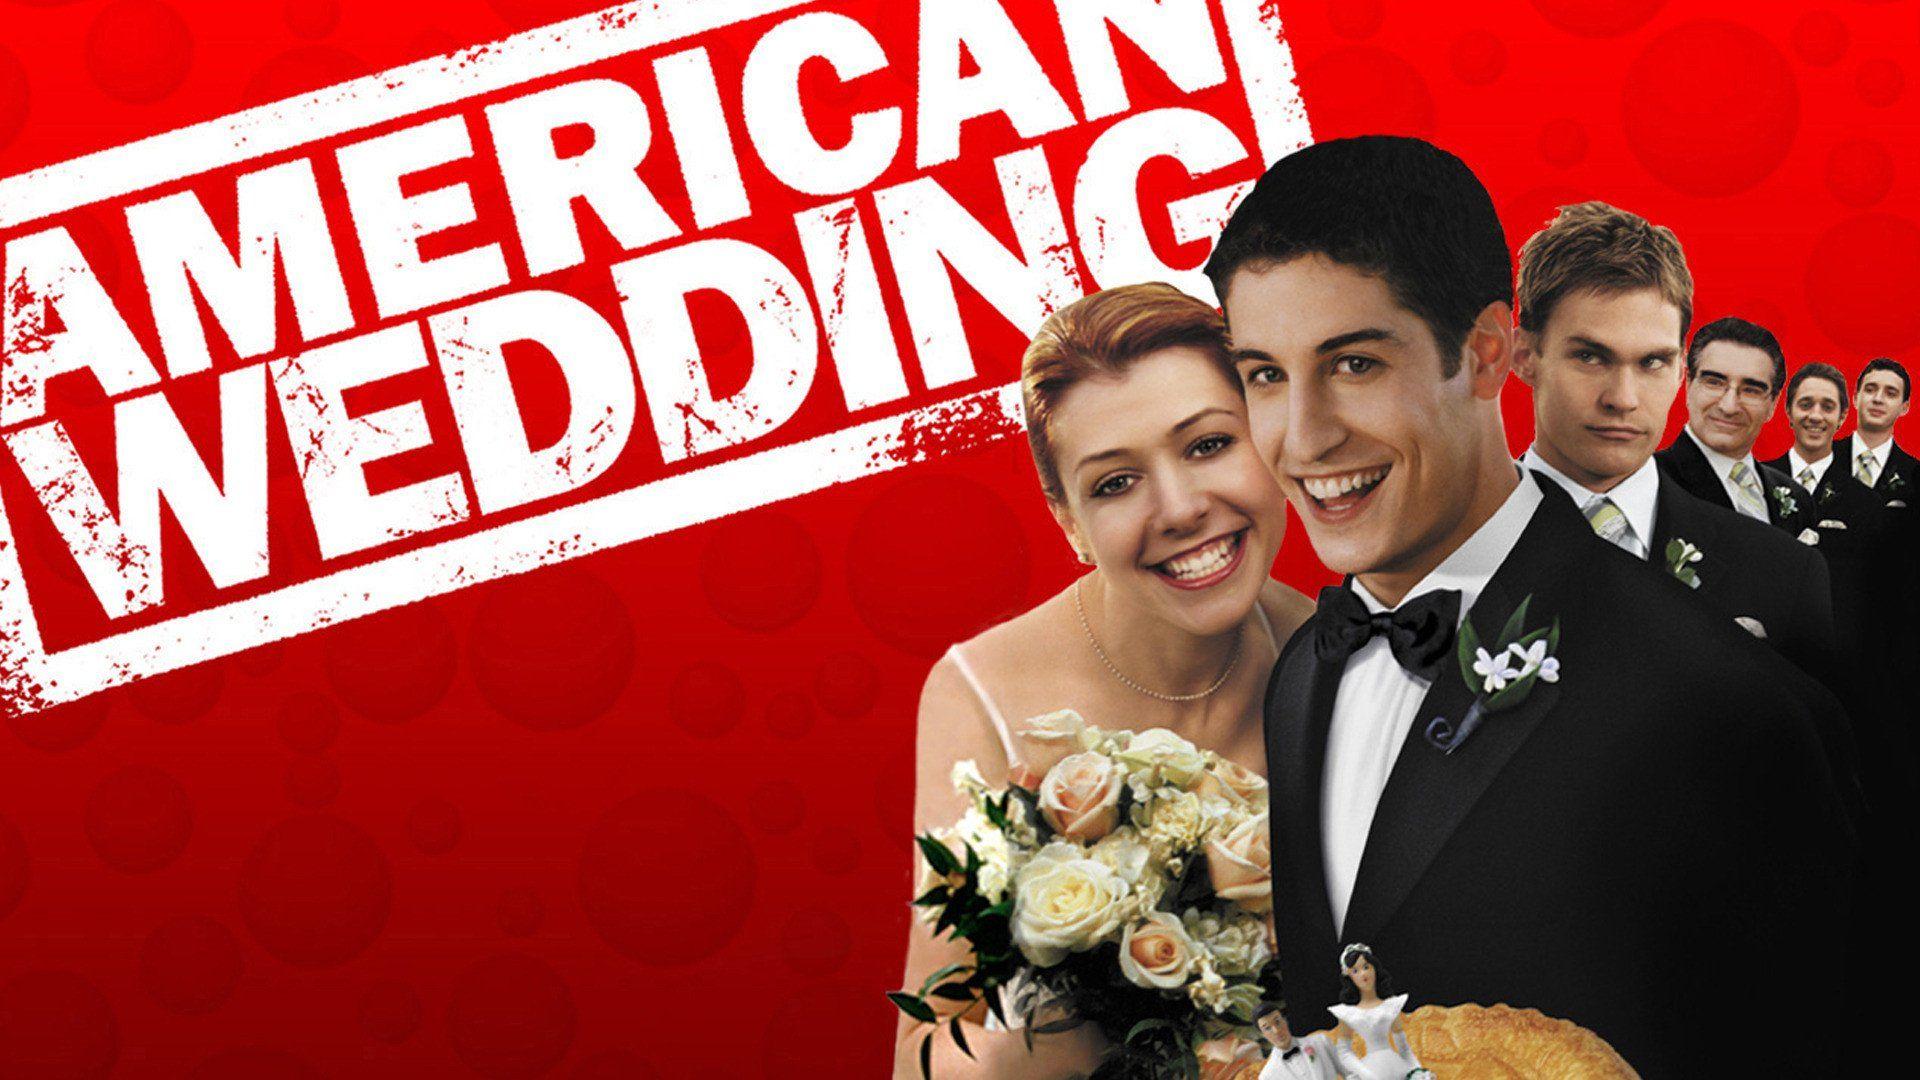 AMERICAN PIE comedy romance sex wallpapers